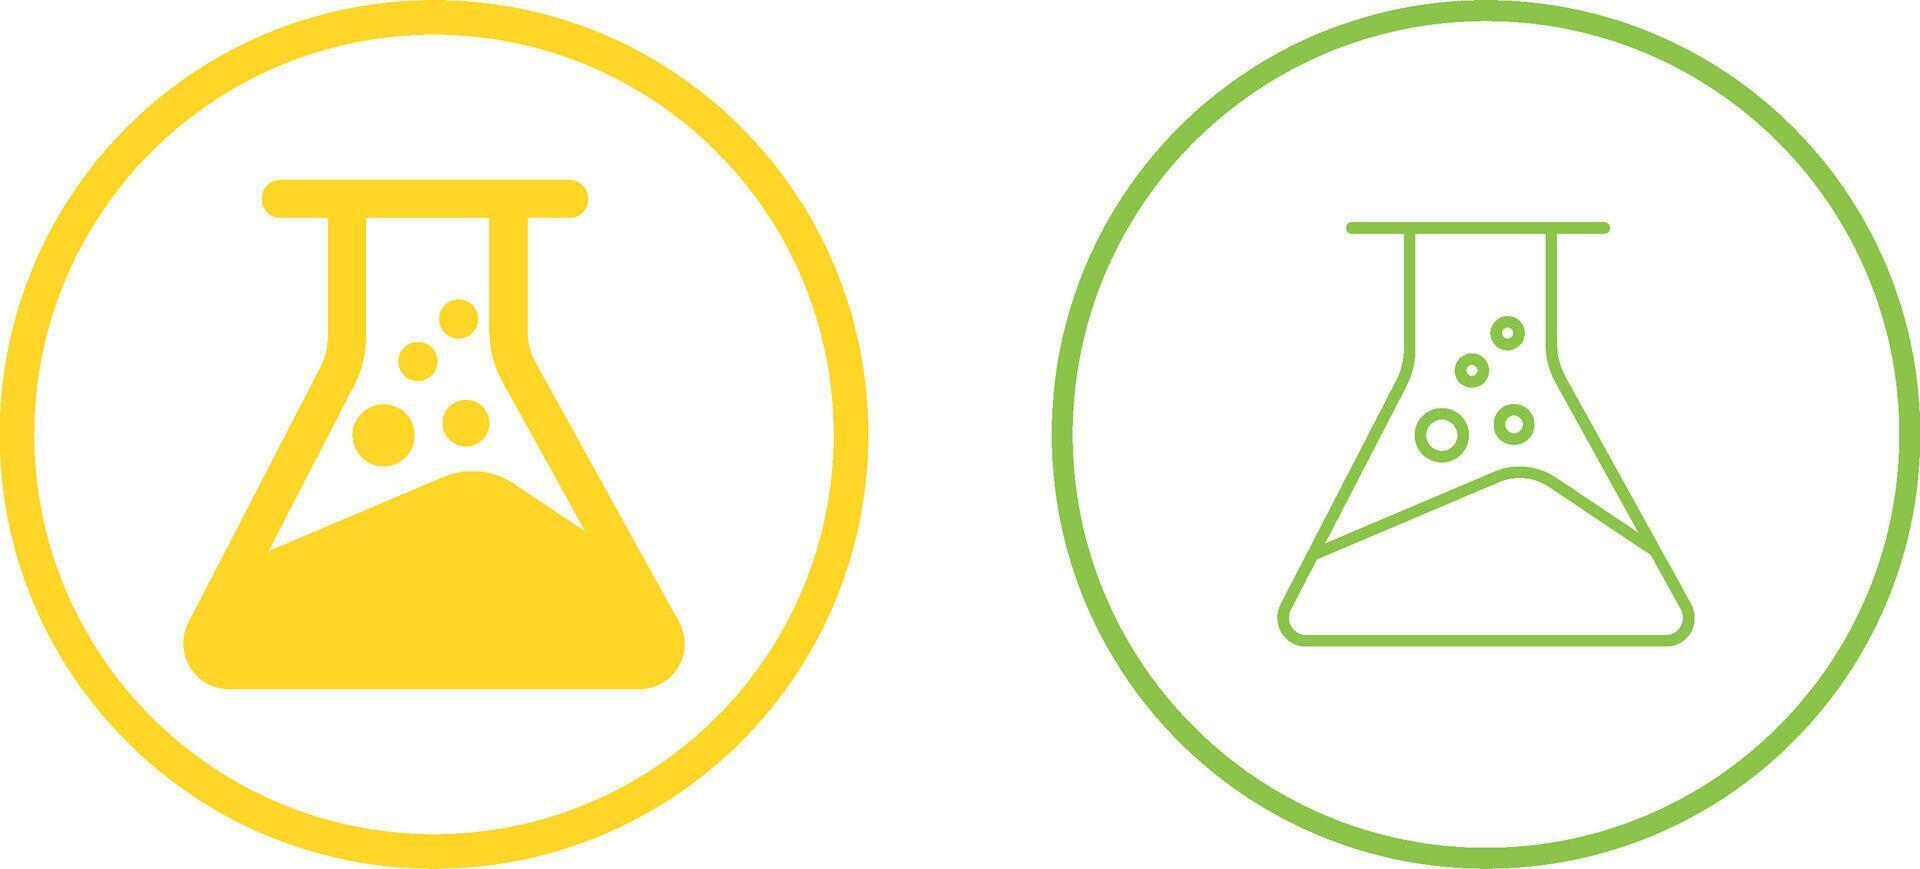 Chemical Flask Vector Icon